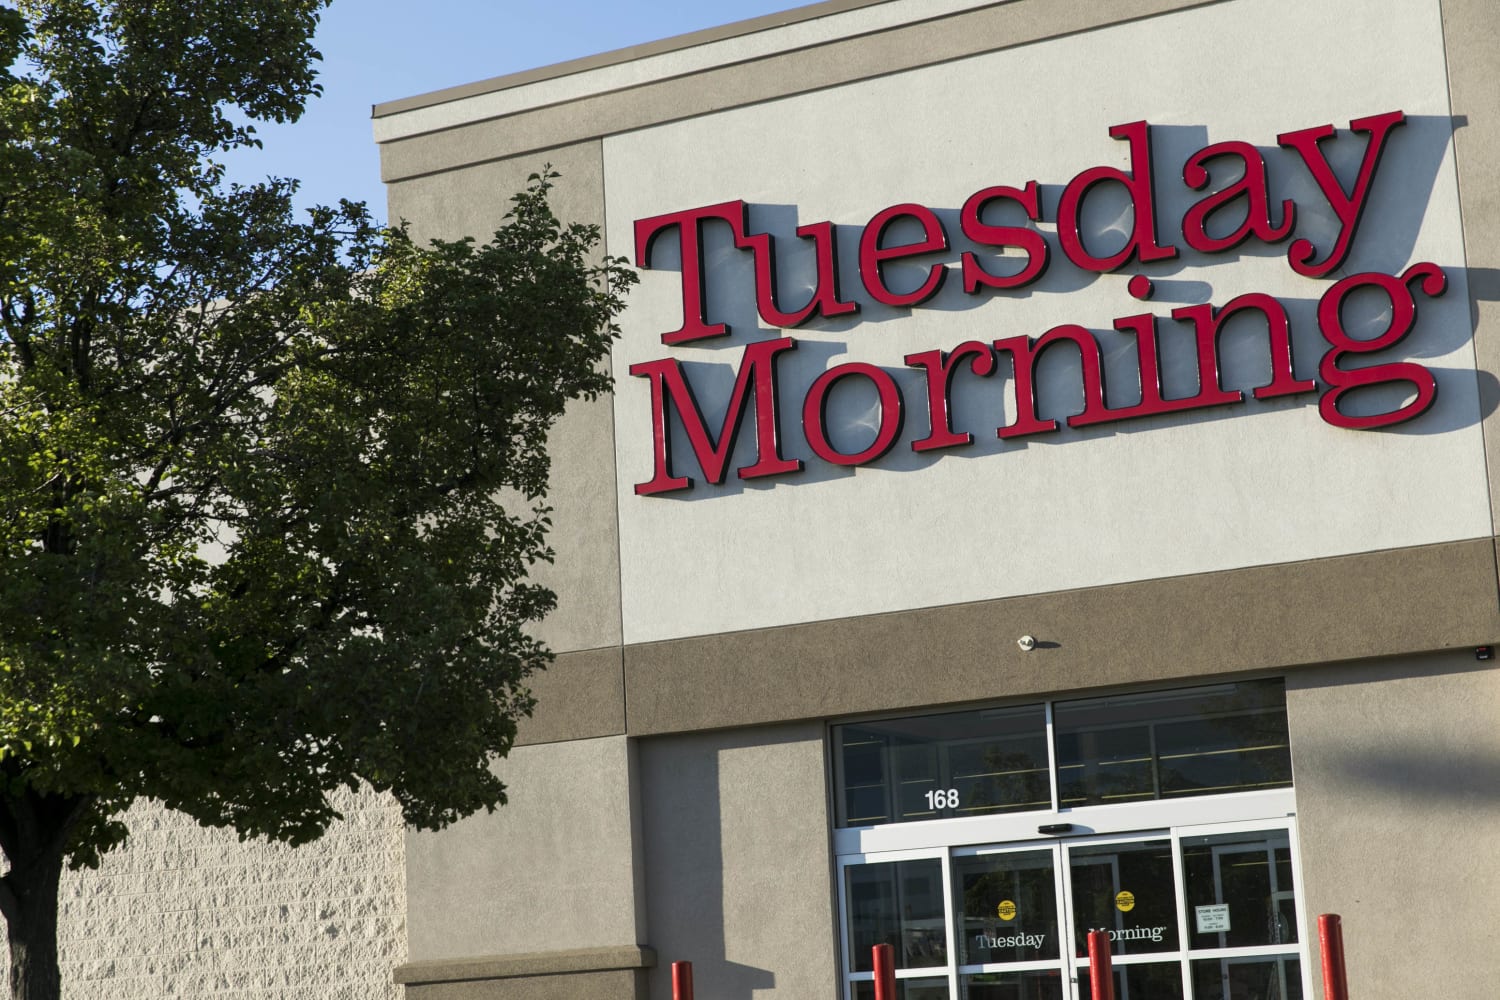 Tuesday Morning stores going out of business after 49 years